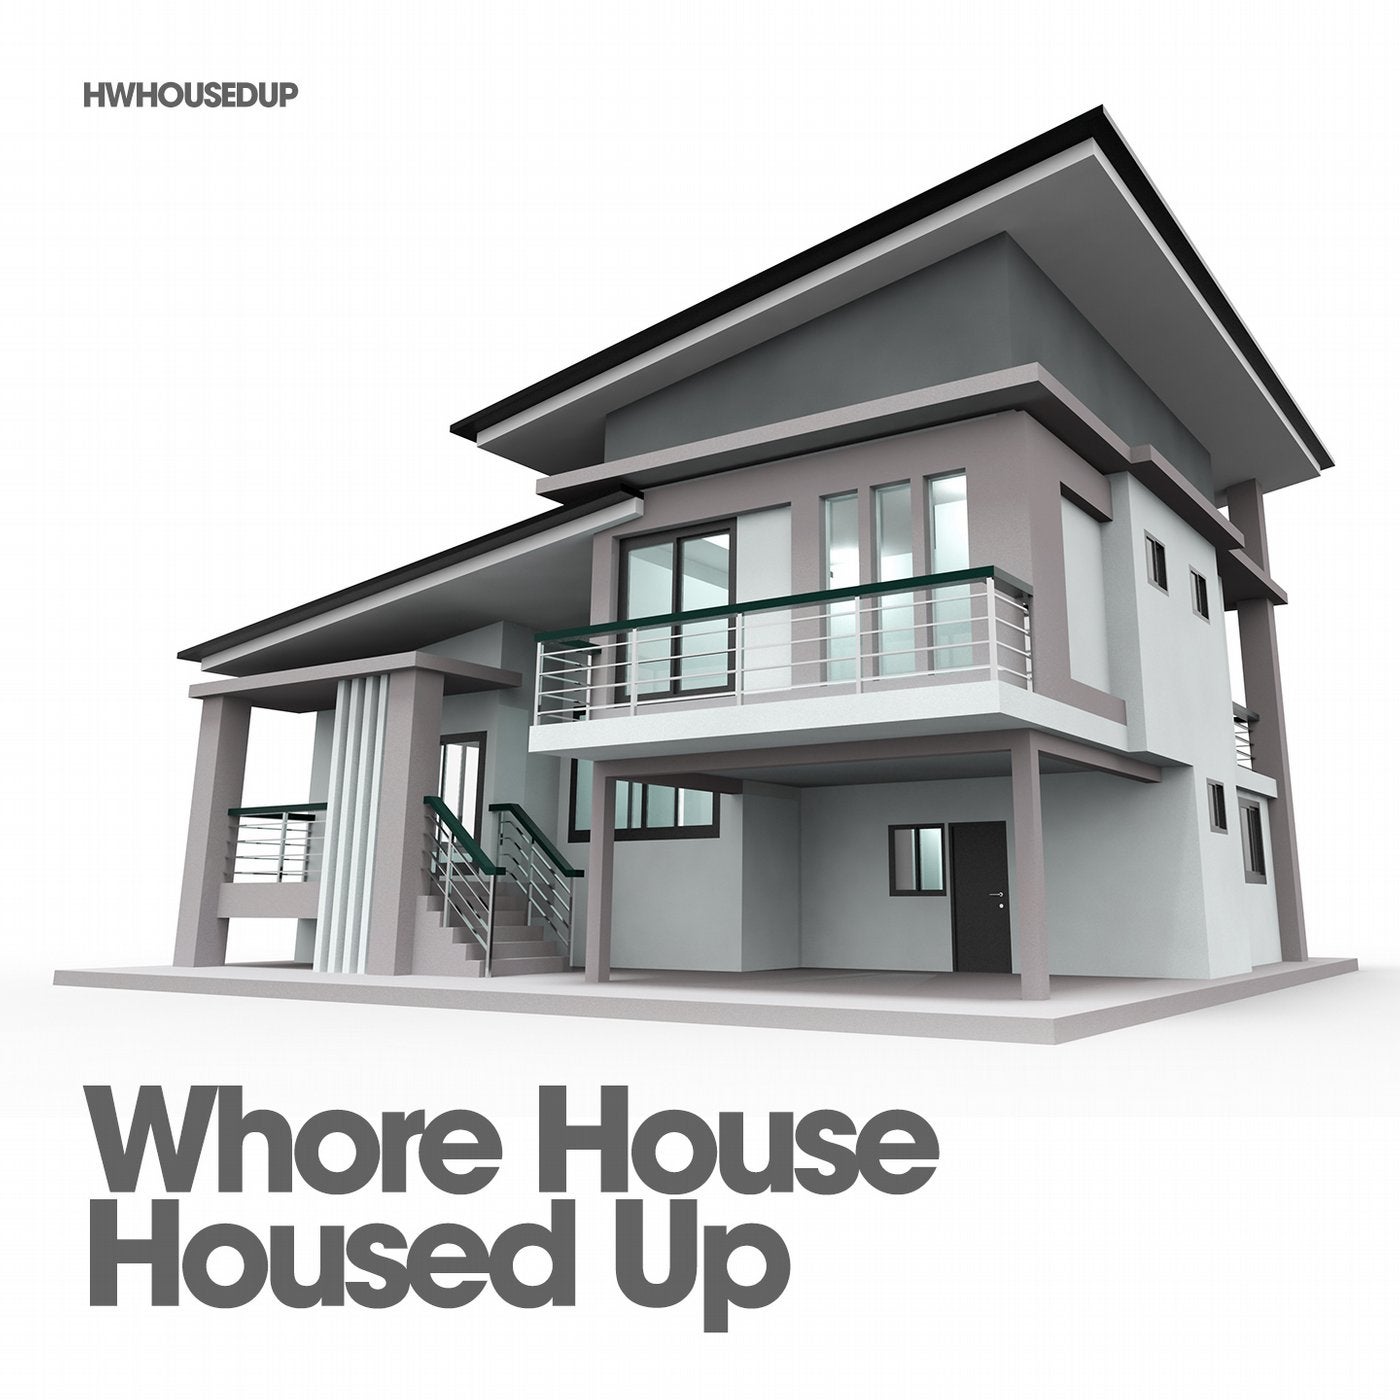 Whore House Housed Up